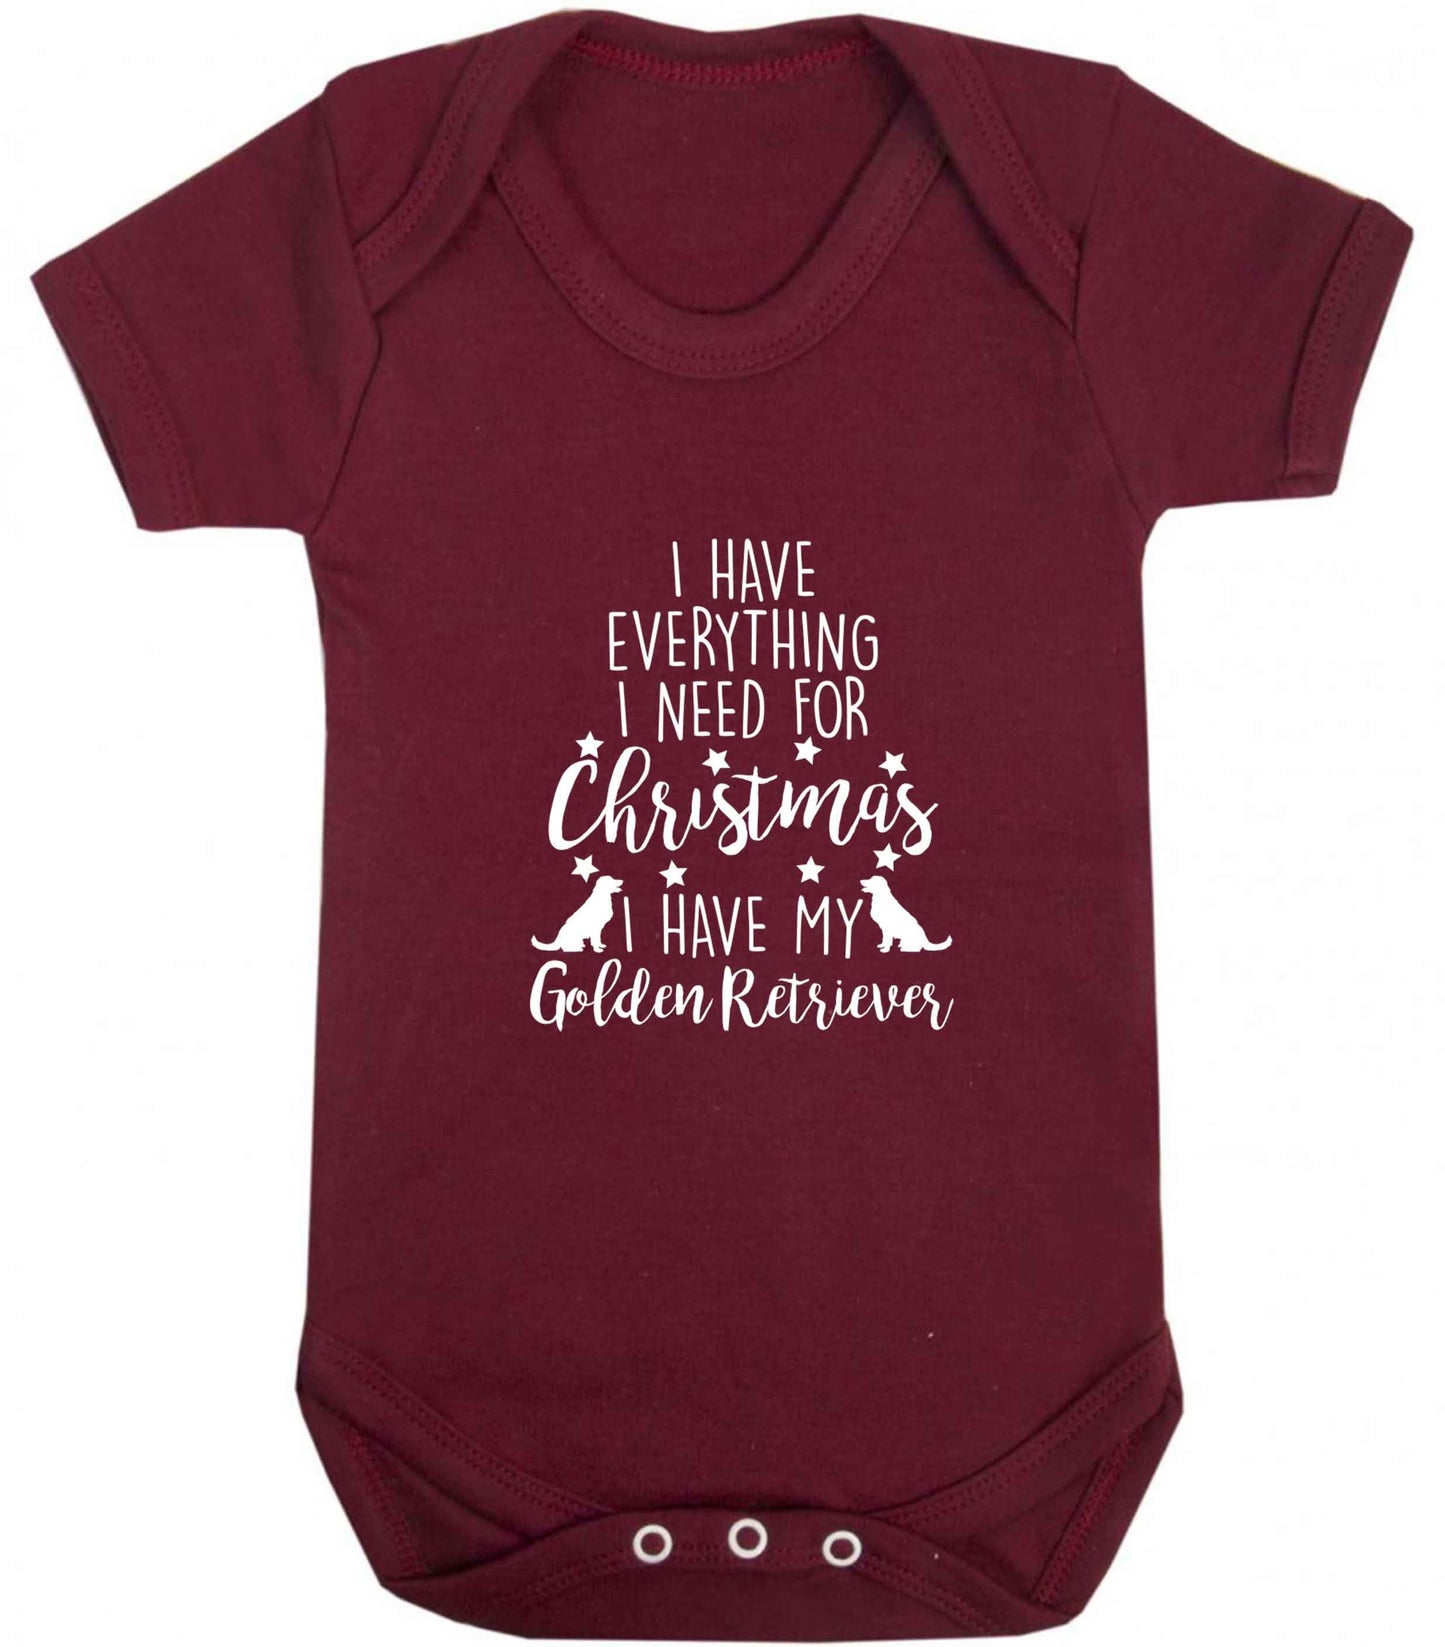 I have everything I need for Christmas I have my golden retriever baby vest maroon 18-24 months